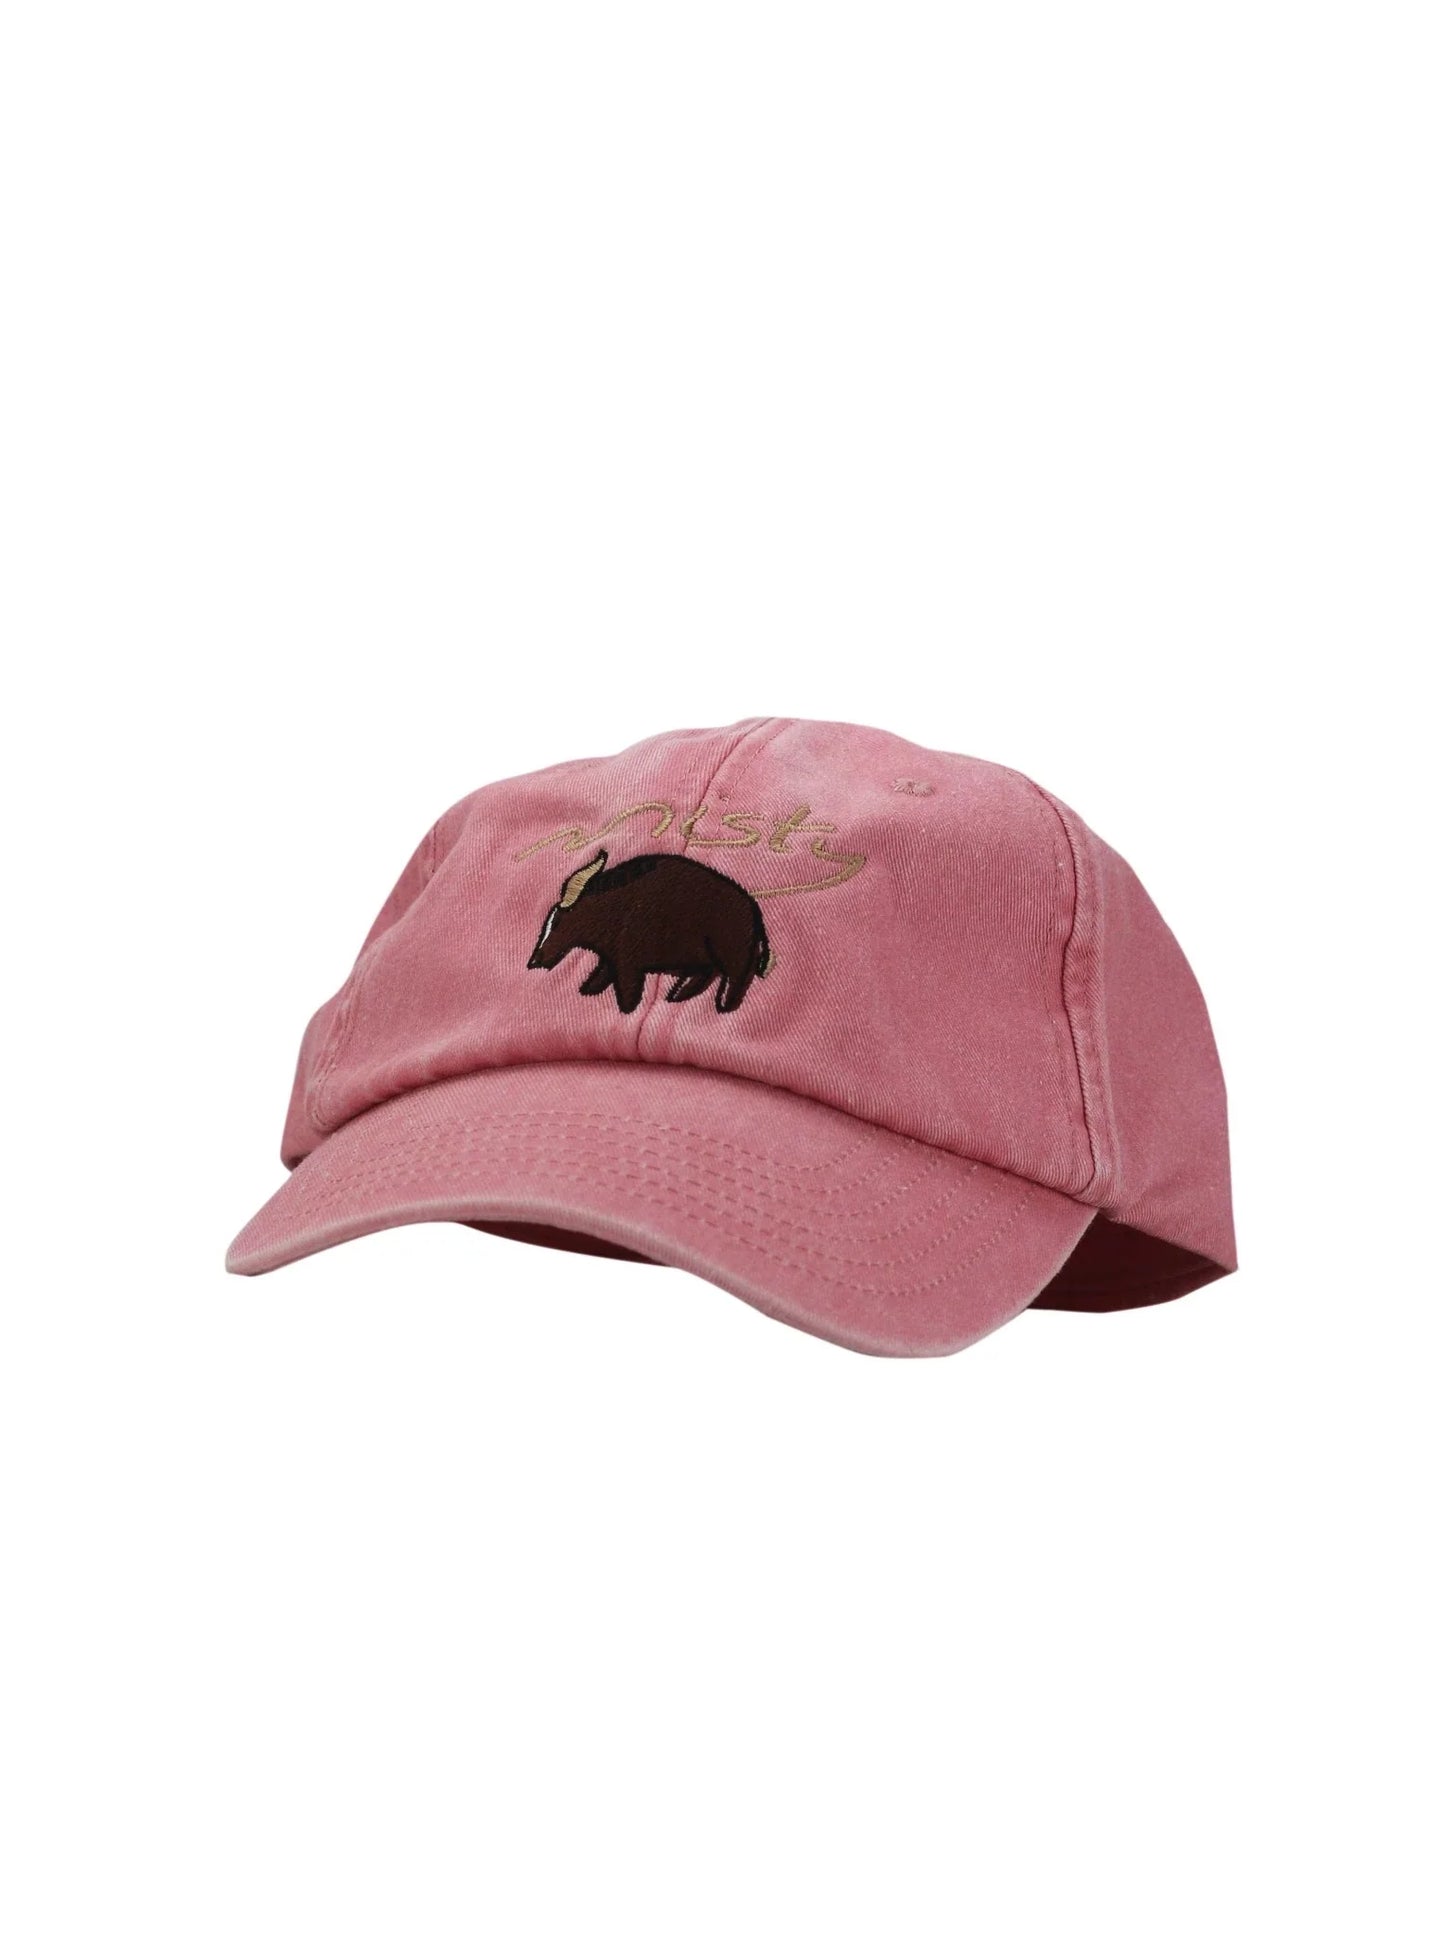 Cap with Yak | Dusty Pink